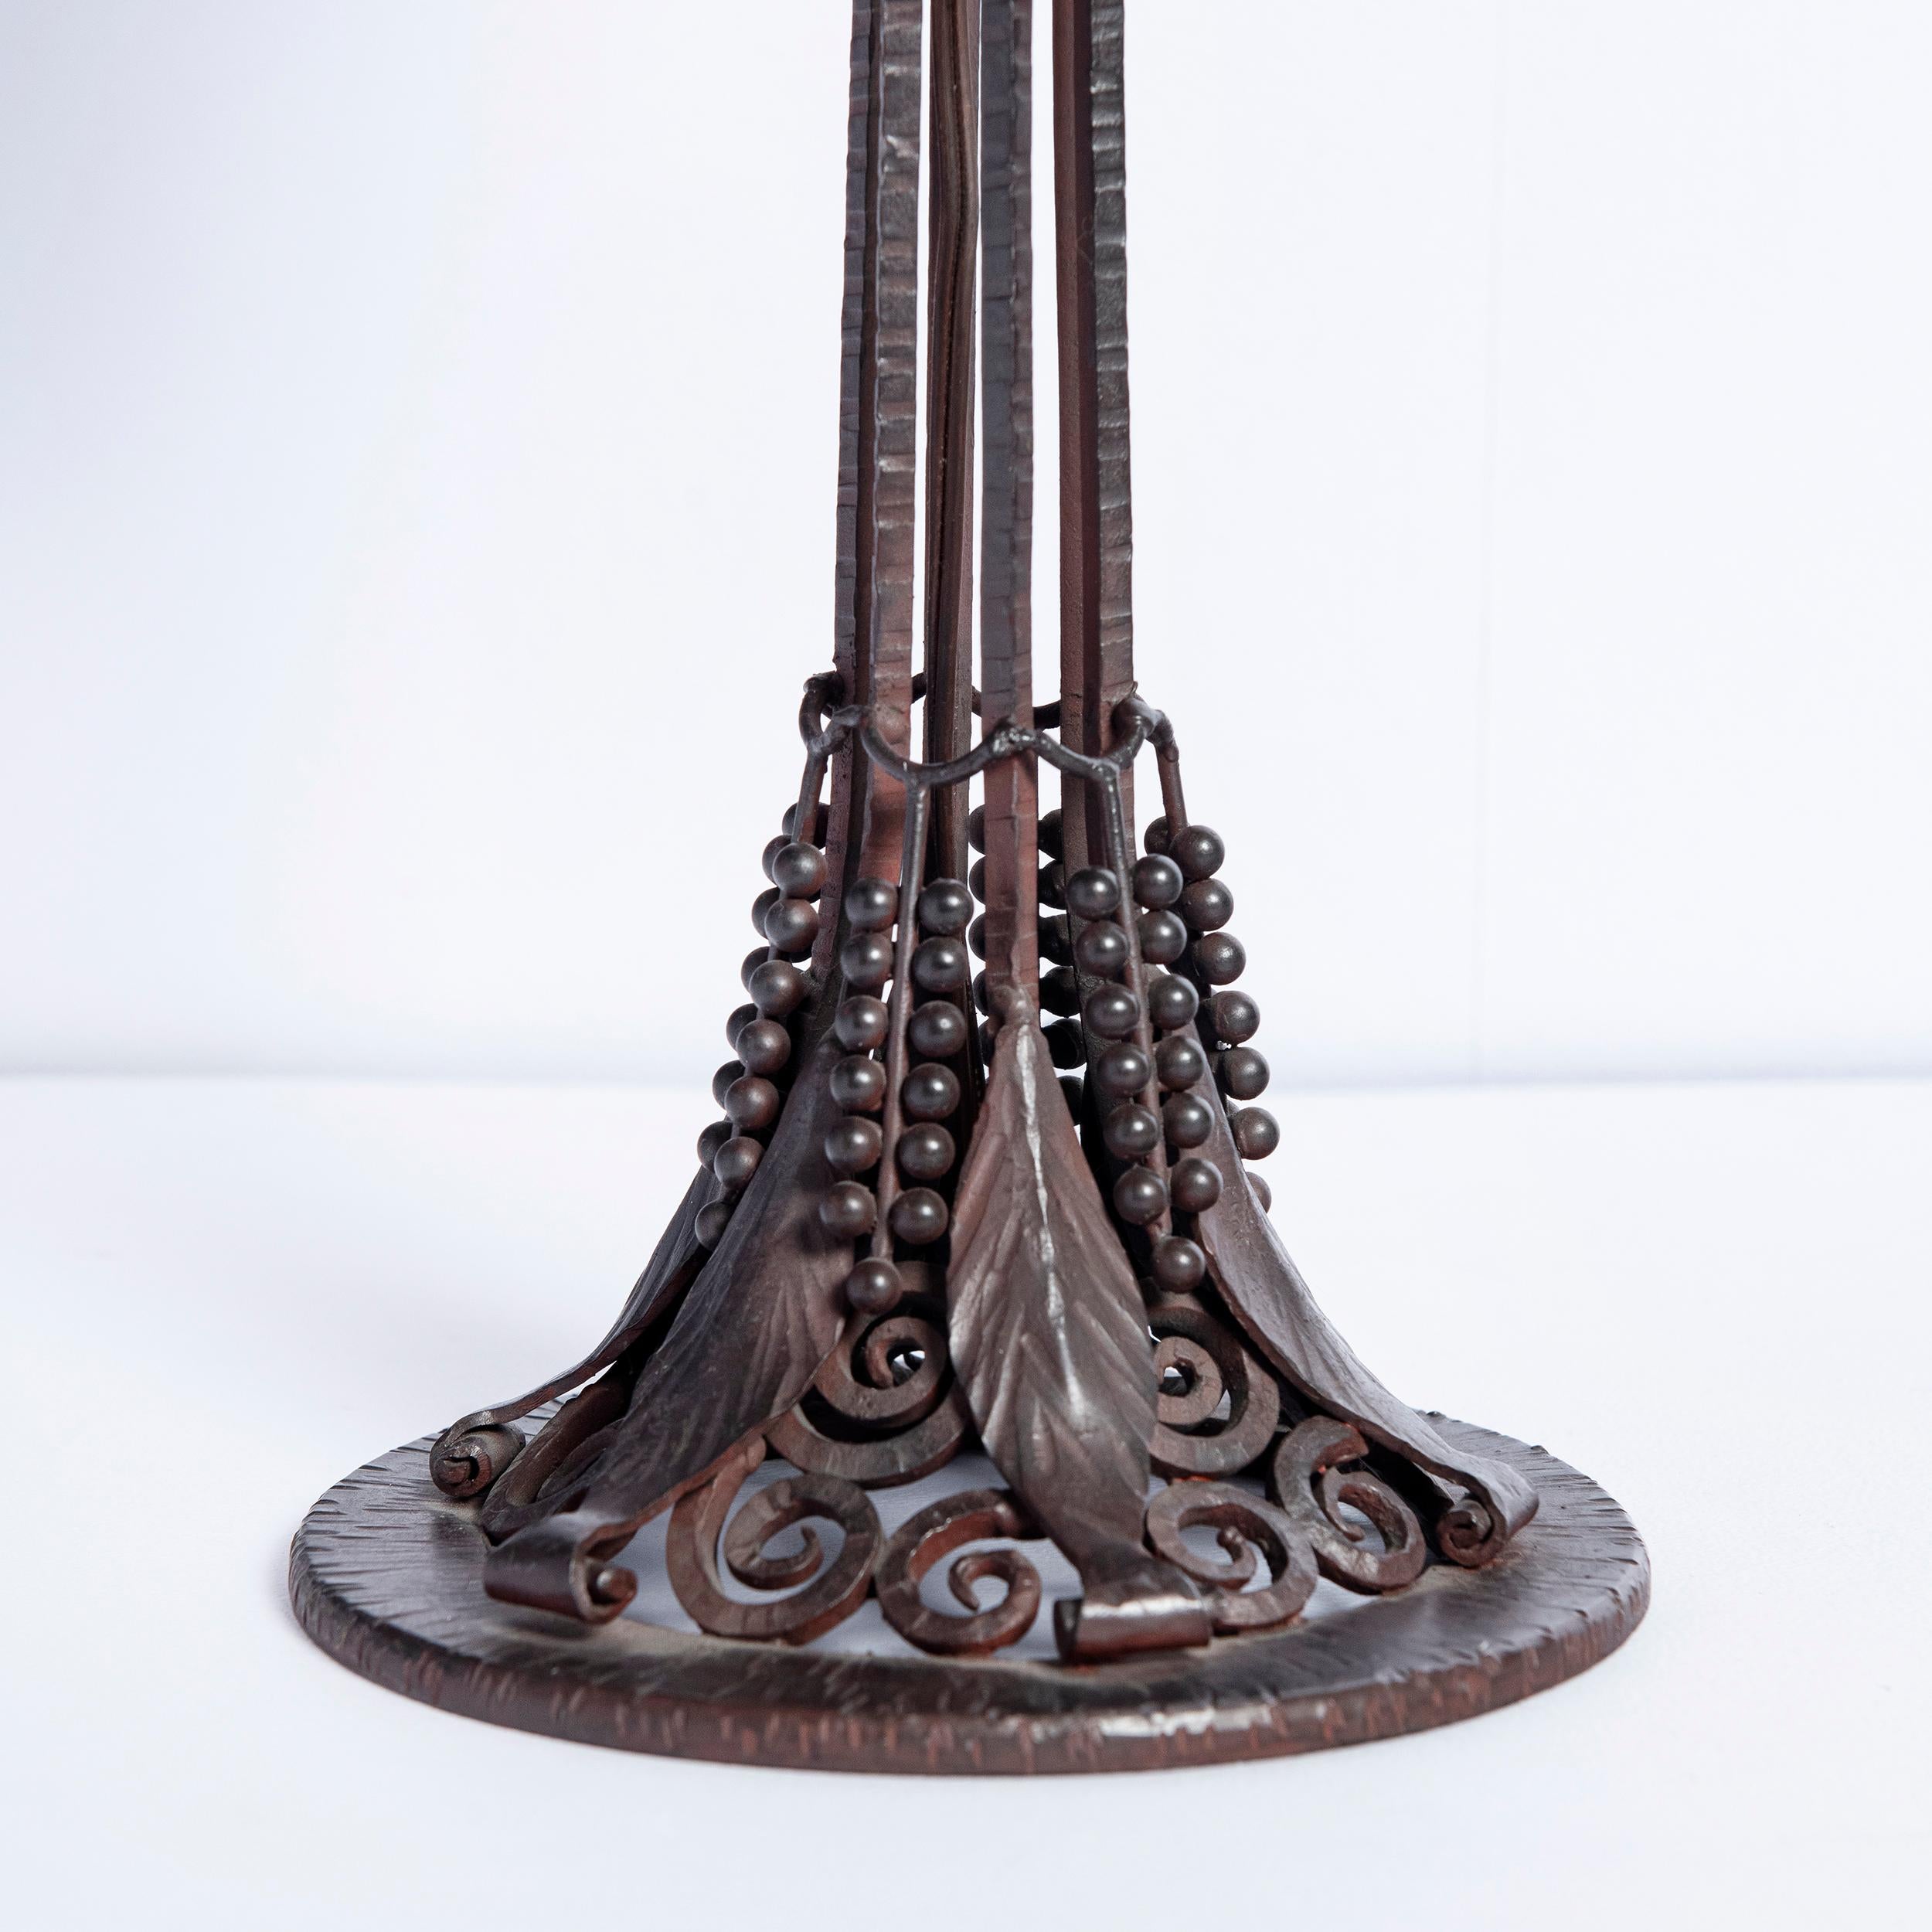 Wrought iron and Schneider glass table lamp, France, circa 1920-1930.